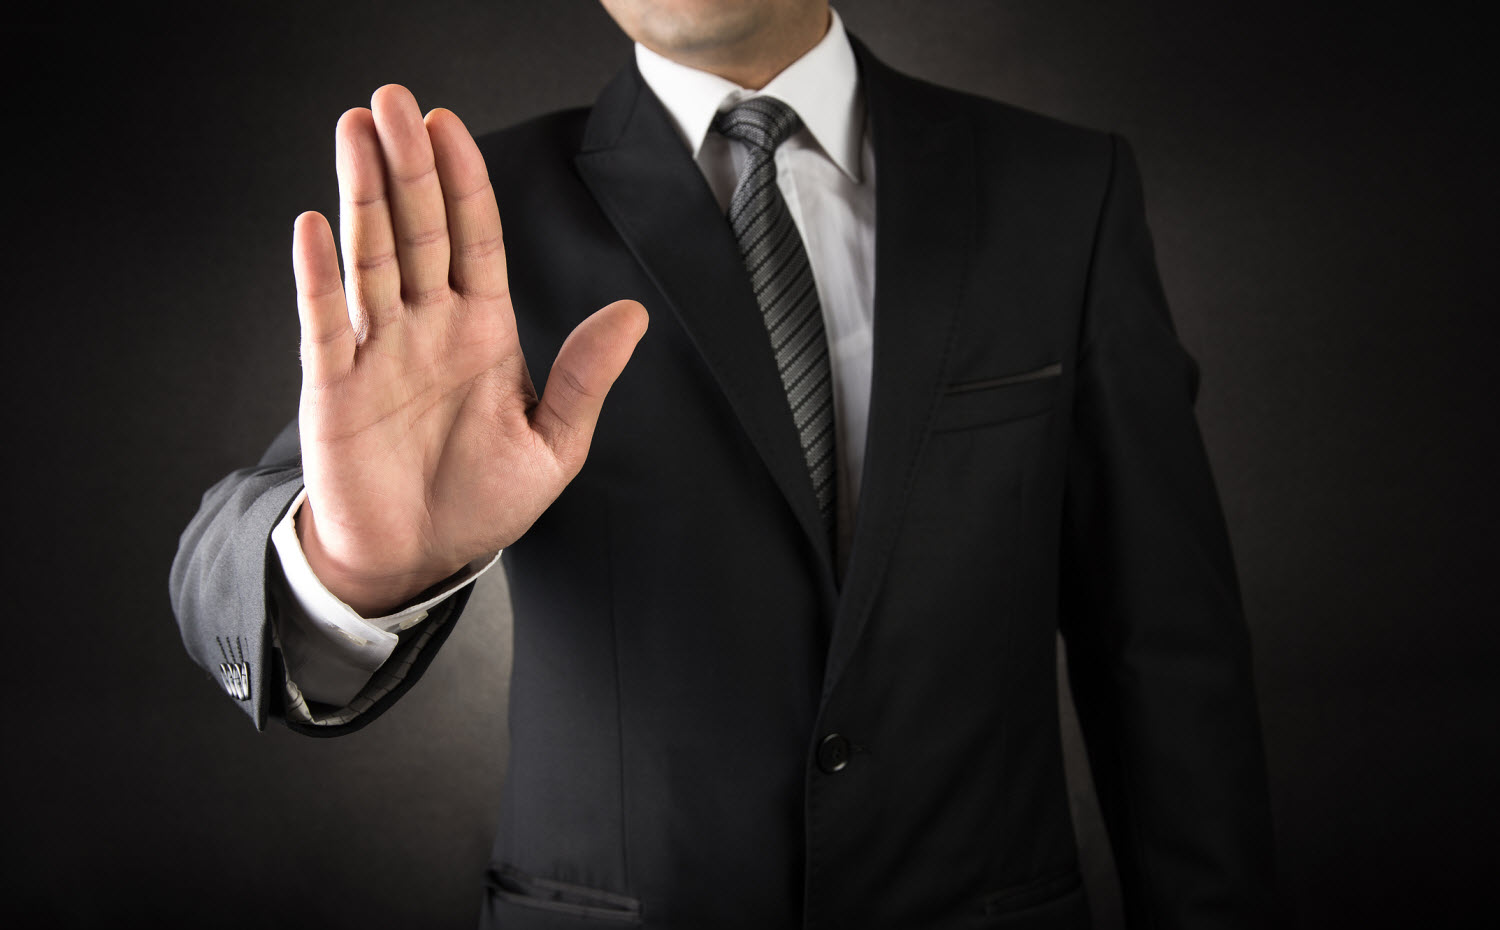 What to Do if You are Being Harassed at Work